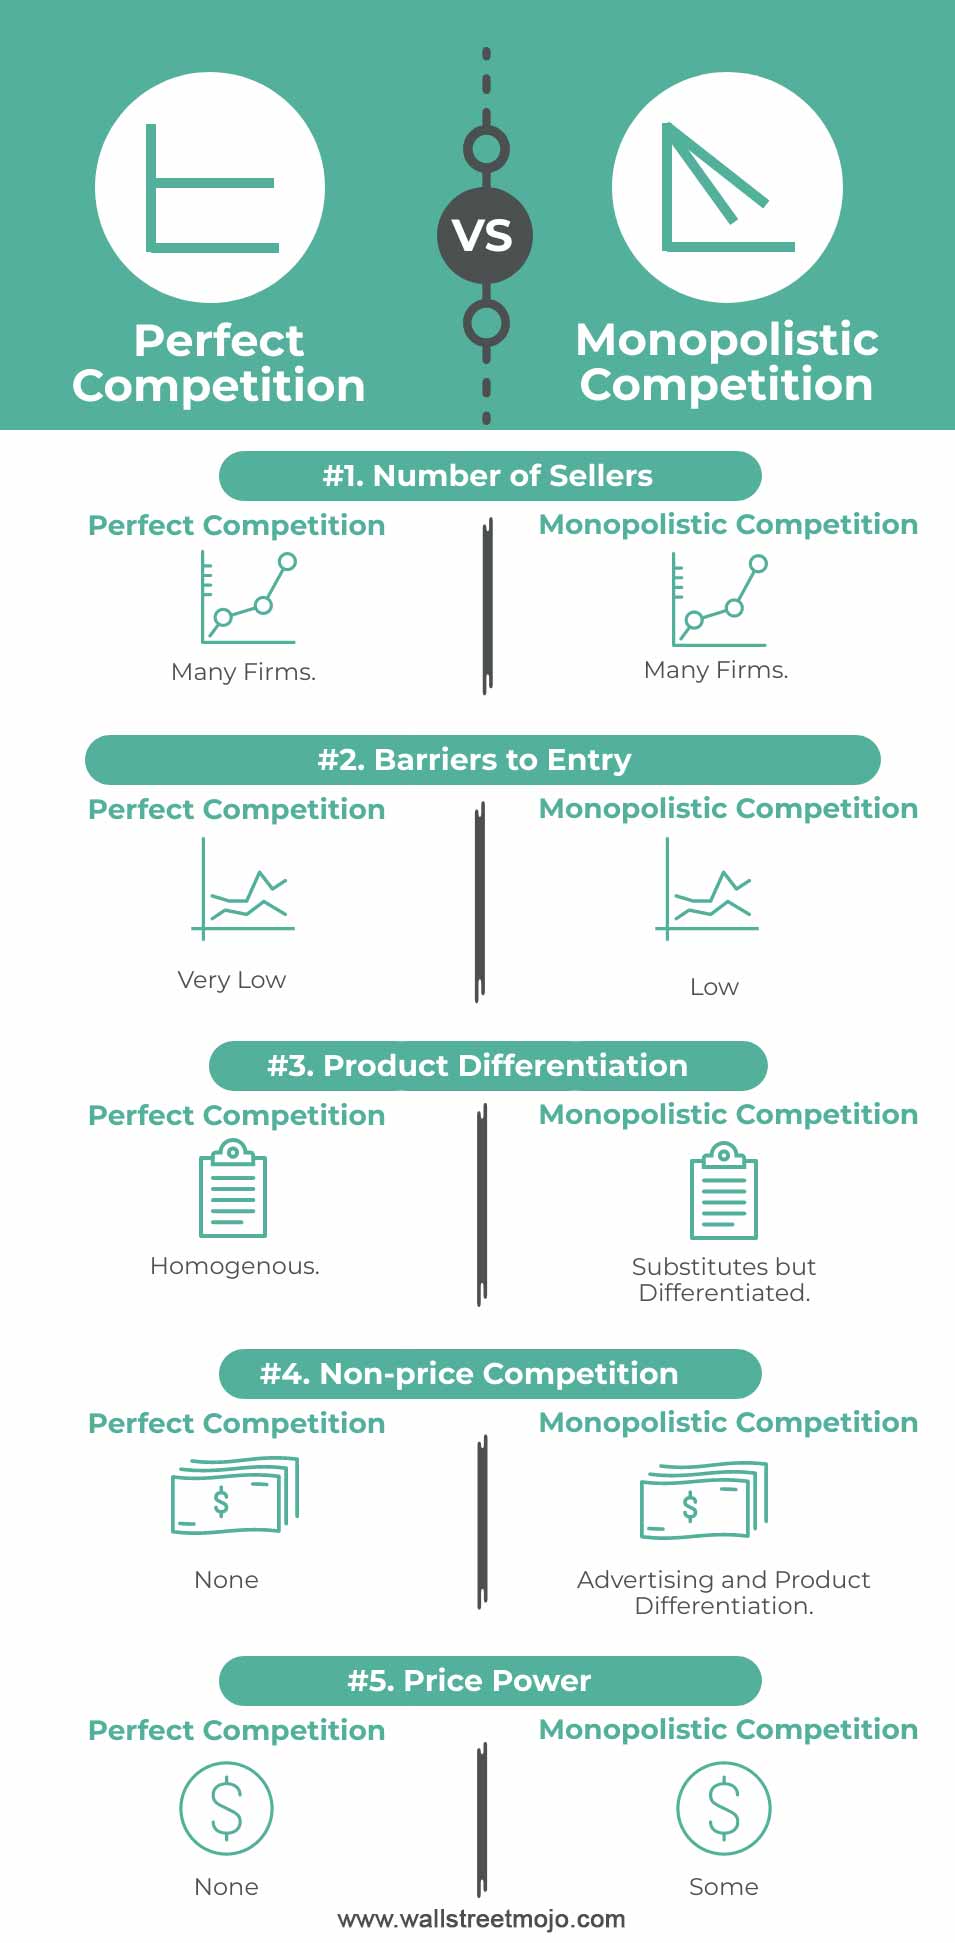 what is the key difference between a monopolist and a perfect competitor?